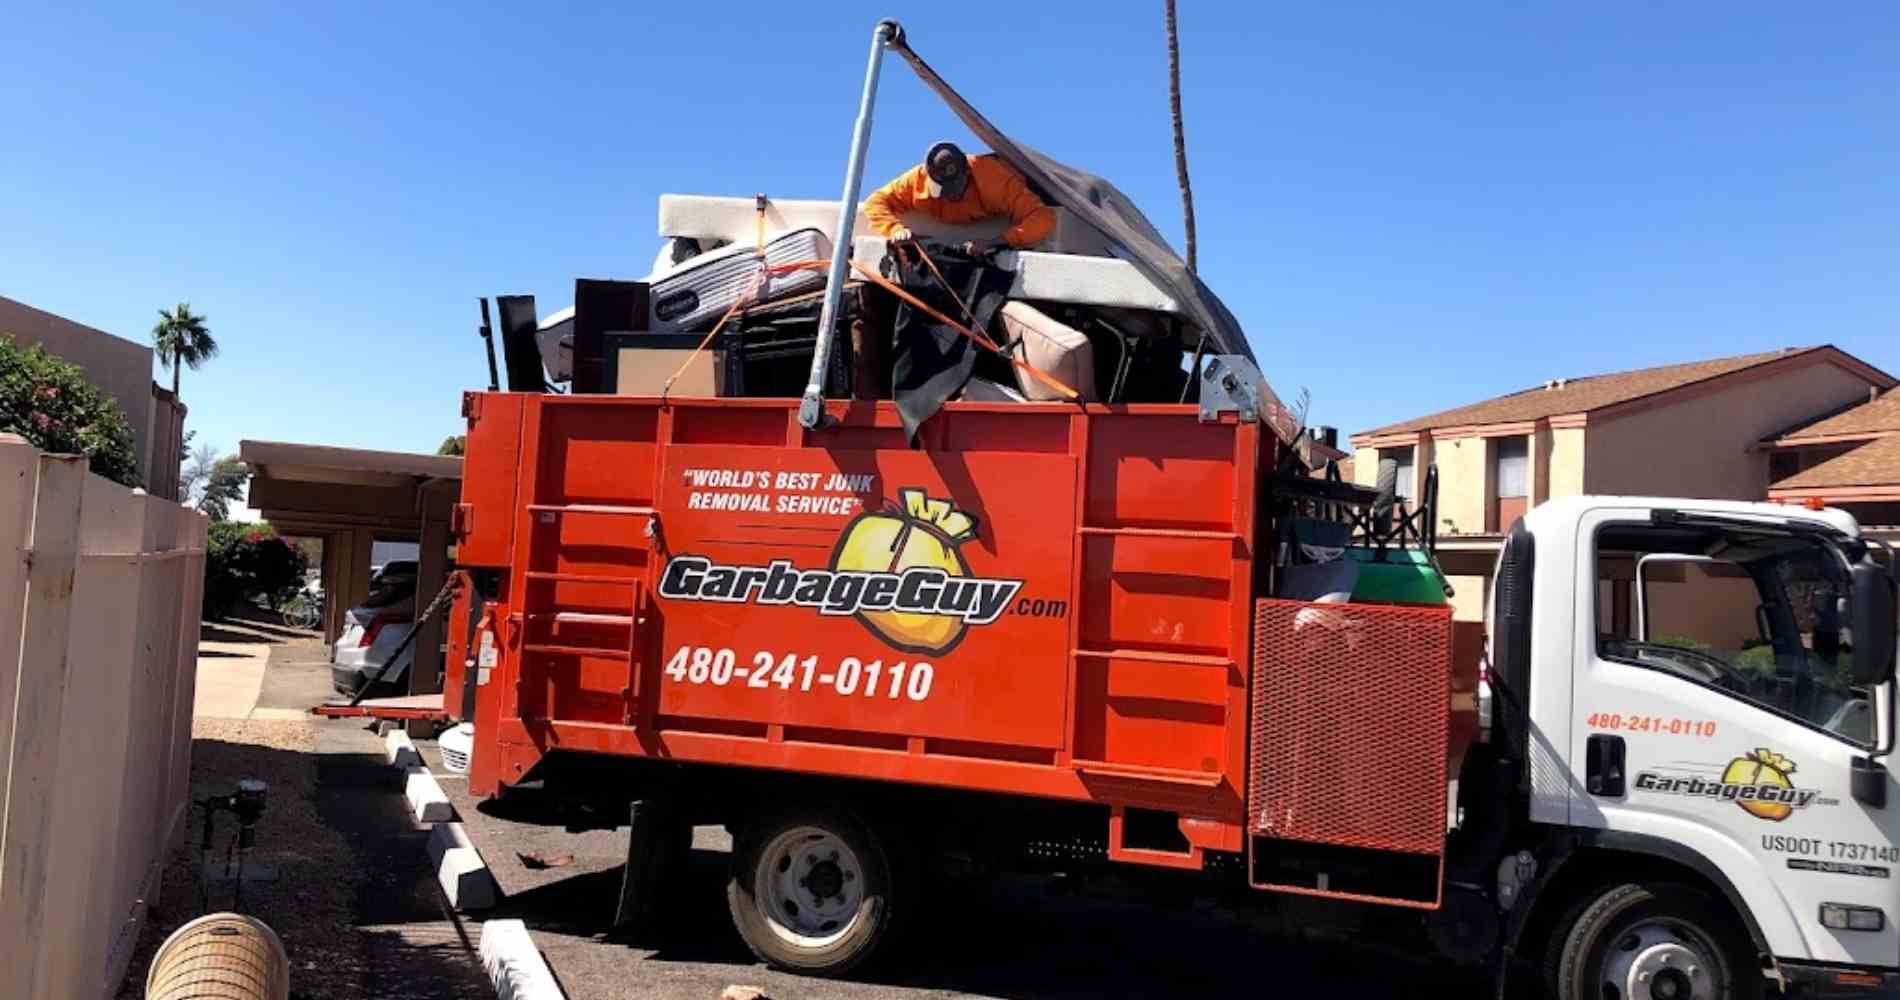 #1 for Furniture Removal in Florence, AZ With Over 1200 5-Star Reviews!